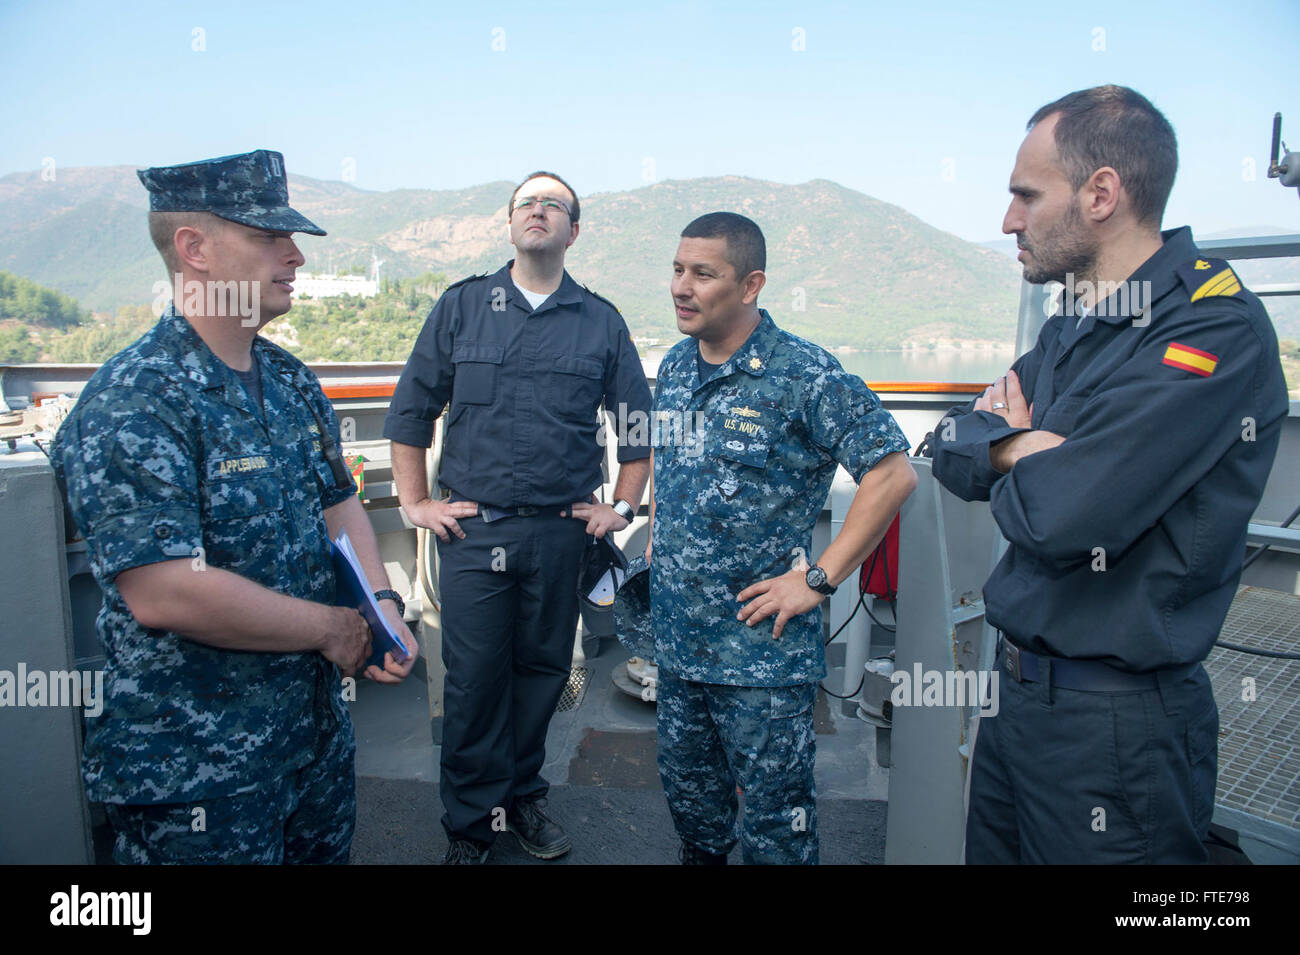 AKSAZ, Turkey (Nov. 04, 2013) - Lt. Jeffrey Applebaugh, left, and Lt. Cmdr. Armando Castellanos, center-right, give a tour of the Arleigh Burke-class guided-missile destroyer USS Stout (DDG 55) to sailors assigned to the Spanish frigate Alvaro de Bazen (F101 during exercise Dogu Akdeniz 13. Stout was invited to participate in Dogu Akdeniz 13, an annual Turkish-led naval training exercise, with forces from the Turkish Coast Guard, Turkish Air Force and ships from Standing NATO Maritime Group 2 (SNMG2). Stout, homeported in Norfolk, Va., is on a scheduled deployment supporting maritime security  Stock Photo